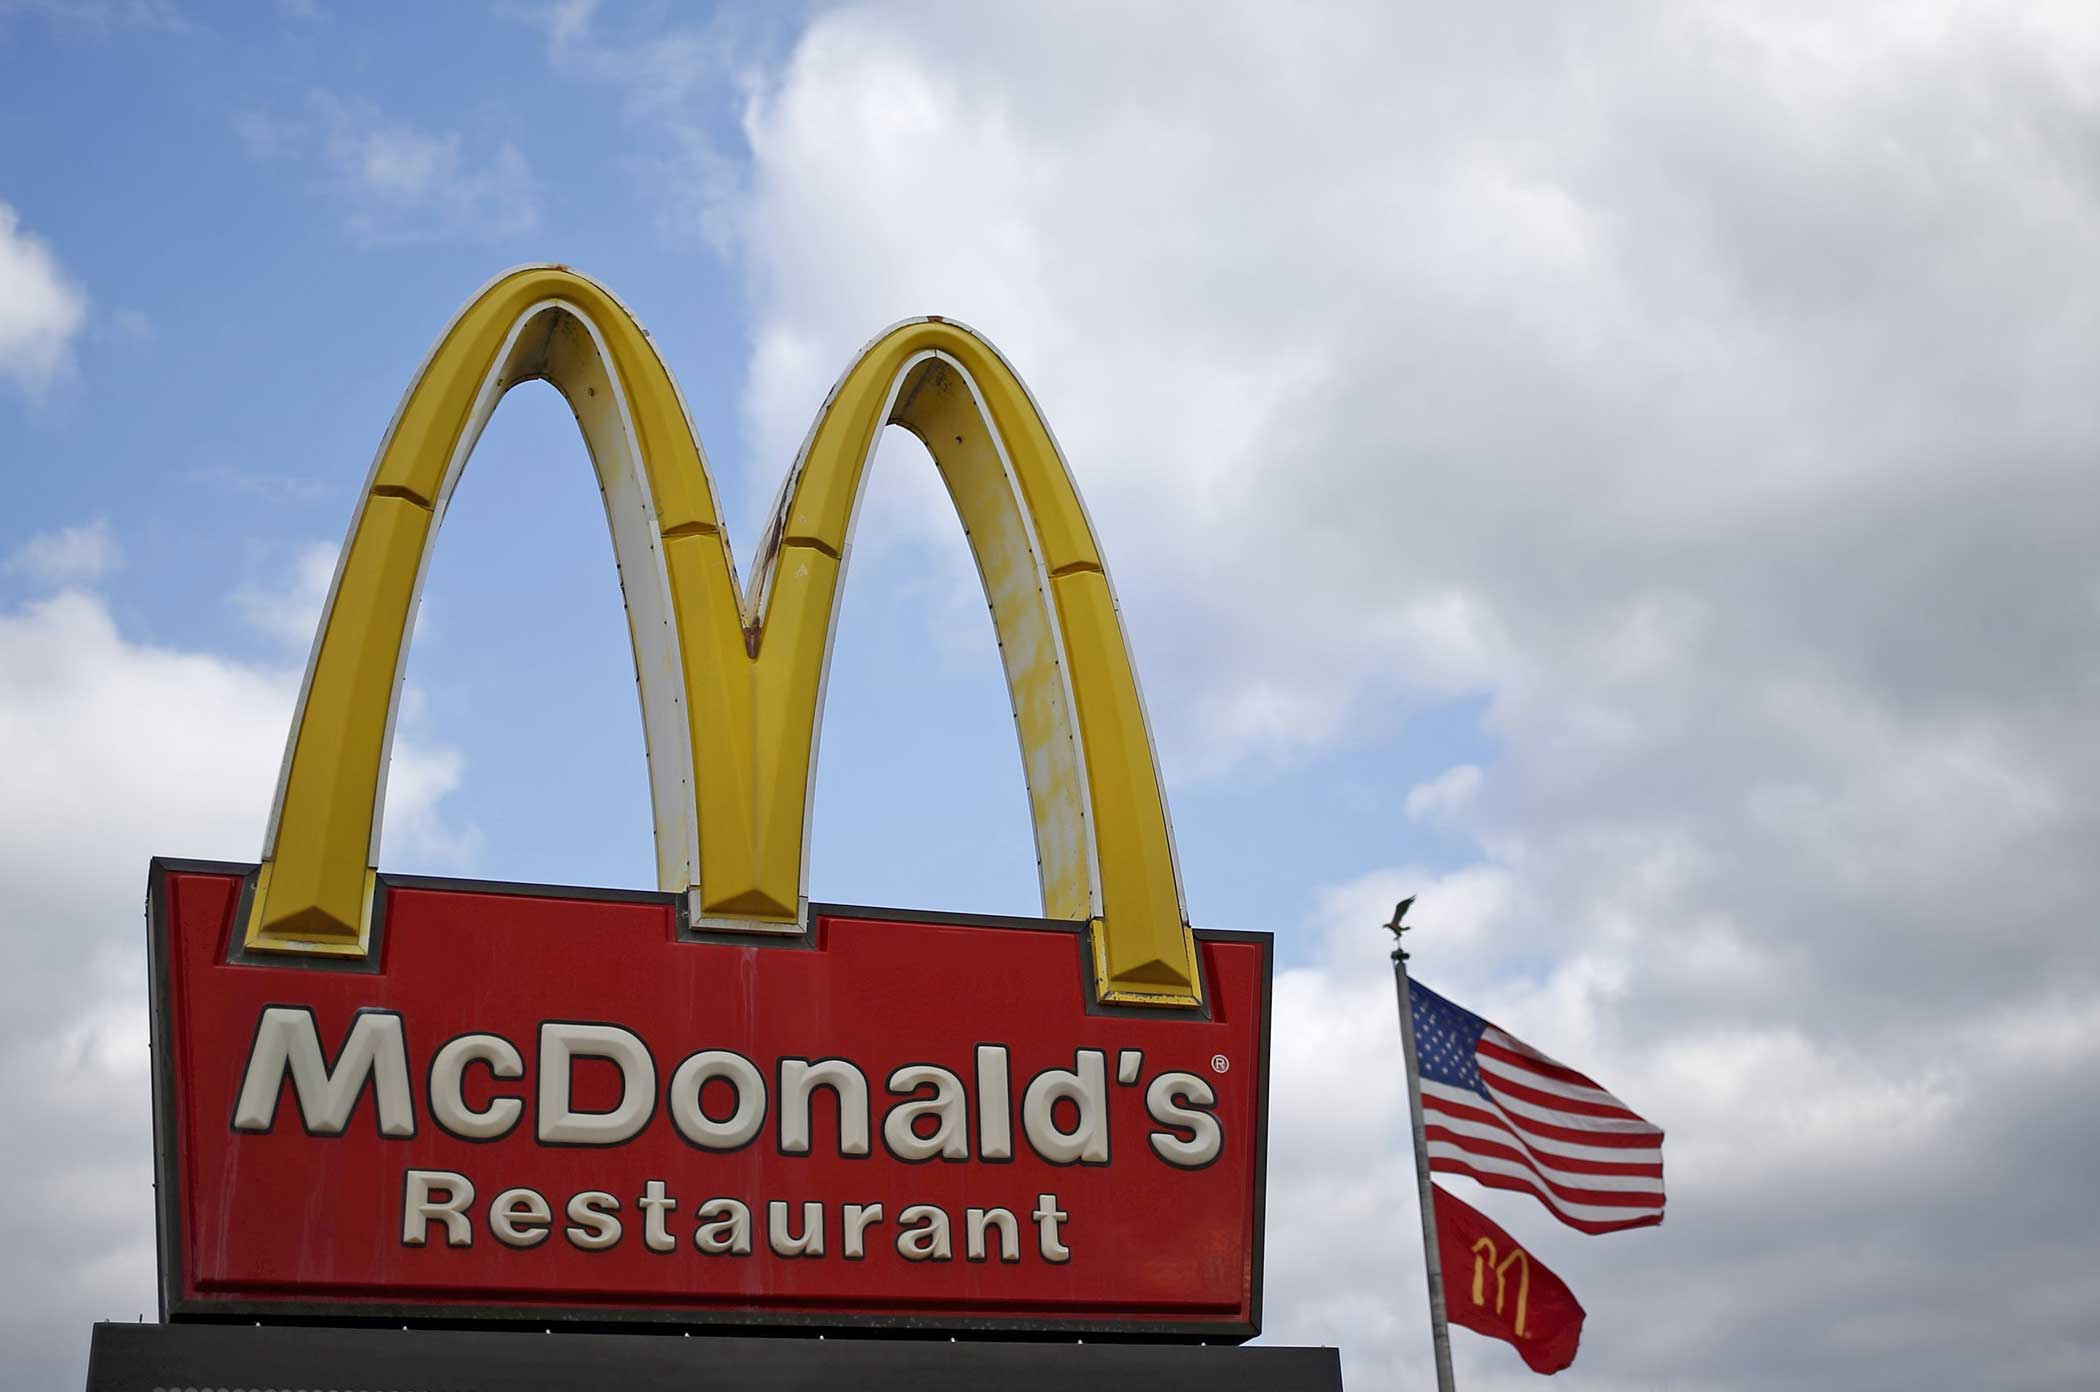 A McDonald's sign is seen outside one of its restaurants in Joliet, Illinois on March 26, 2015.